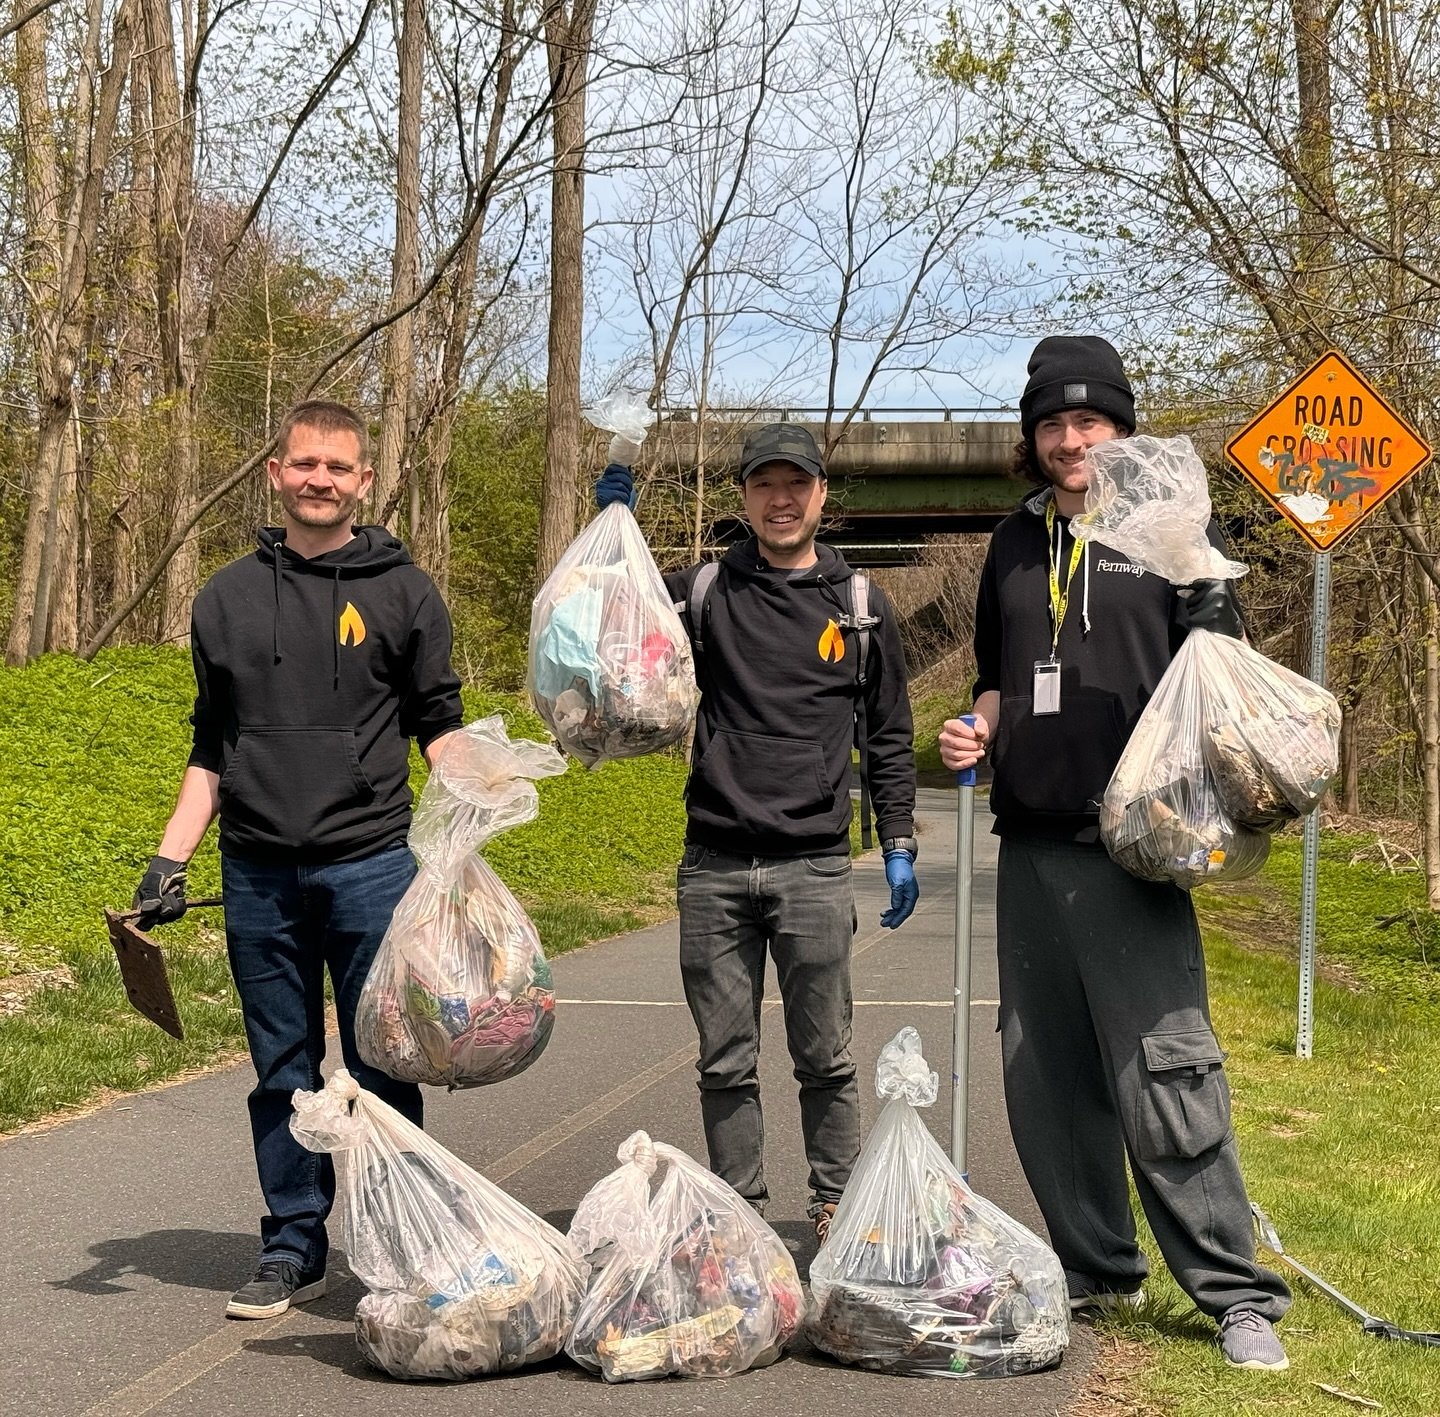 Annual bike path cleanup session from our #Northampton team 💚🌿🍃 Being right on the bike path is such a great thing for our team, we all love being connected to nature! We&rsquo;re always happy to lend a helping hand 🤚 🔥